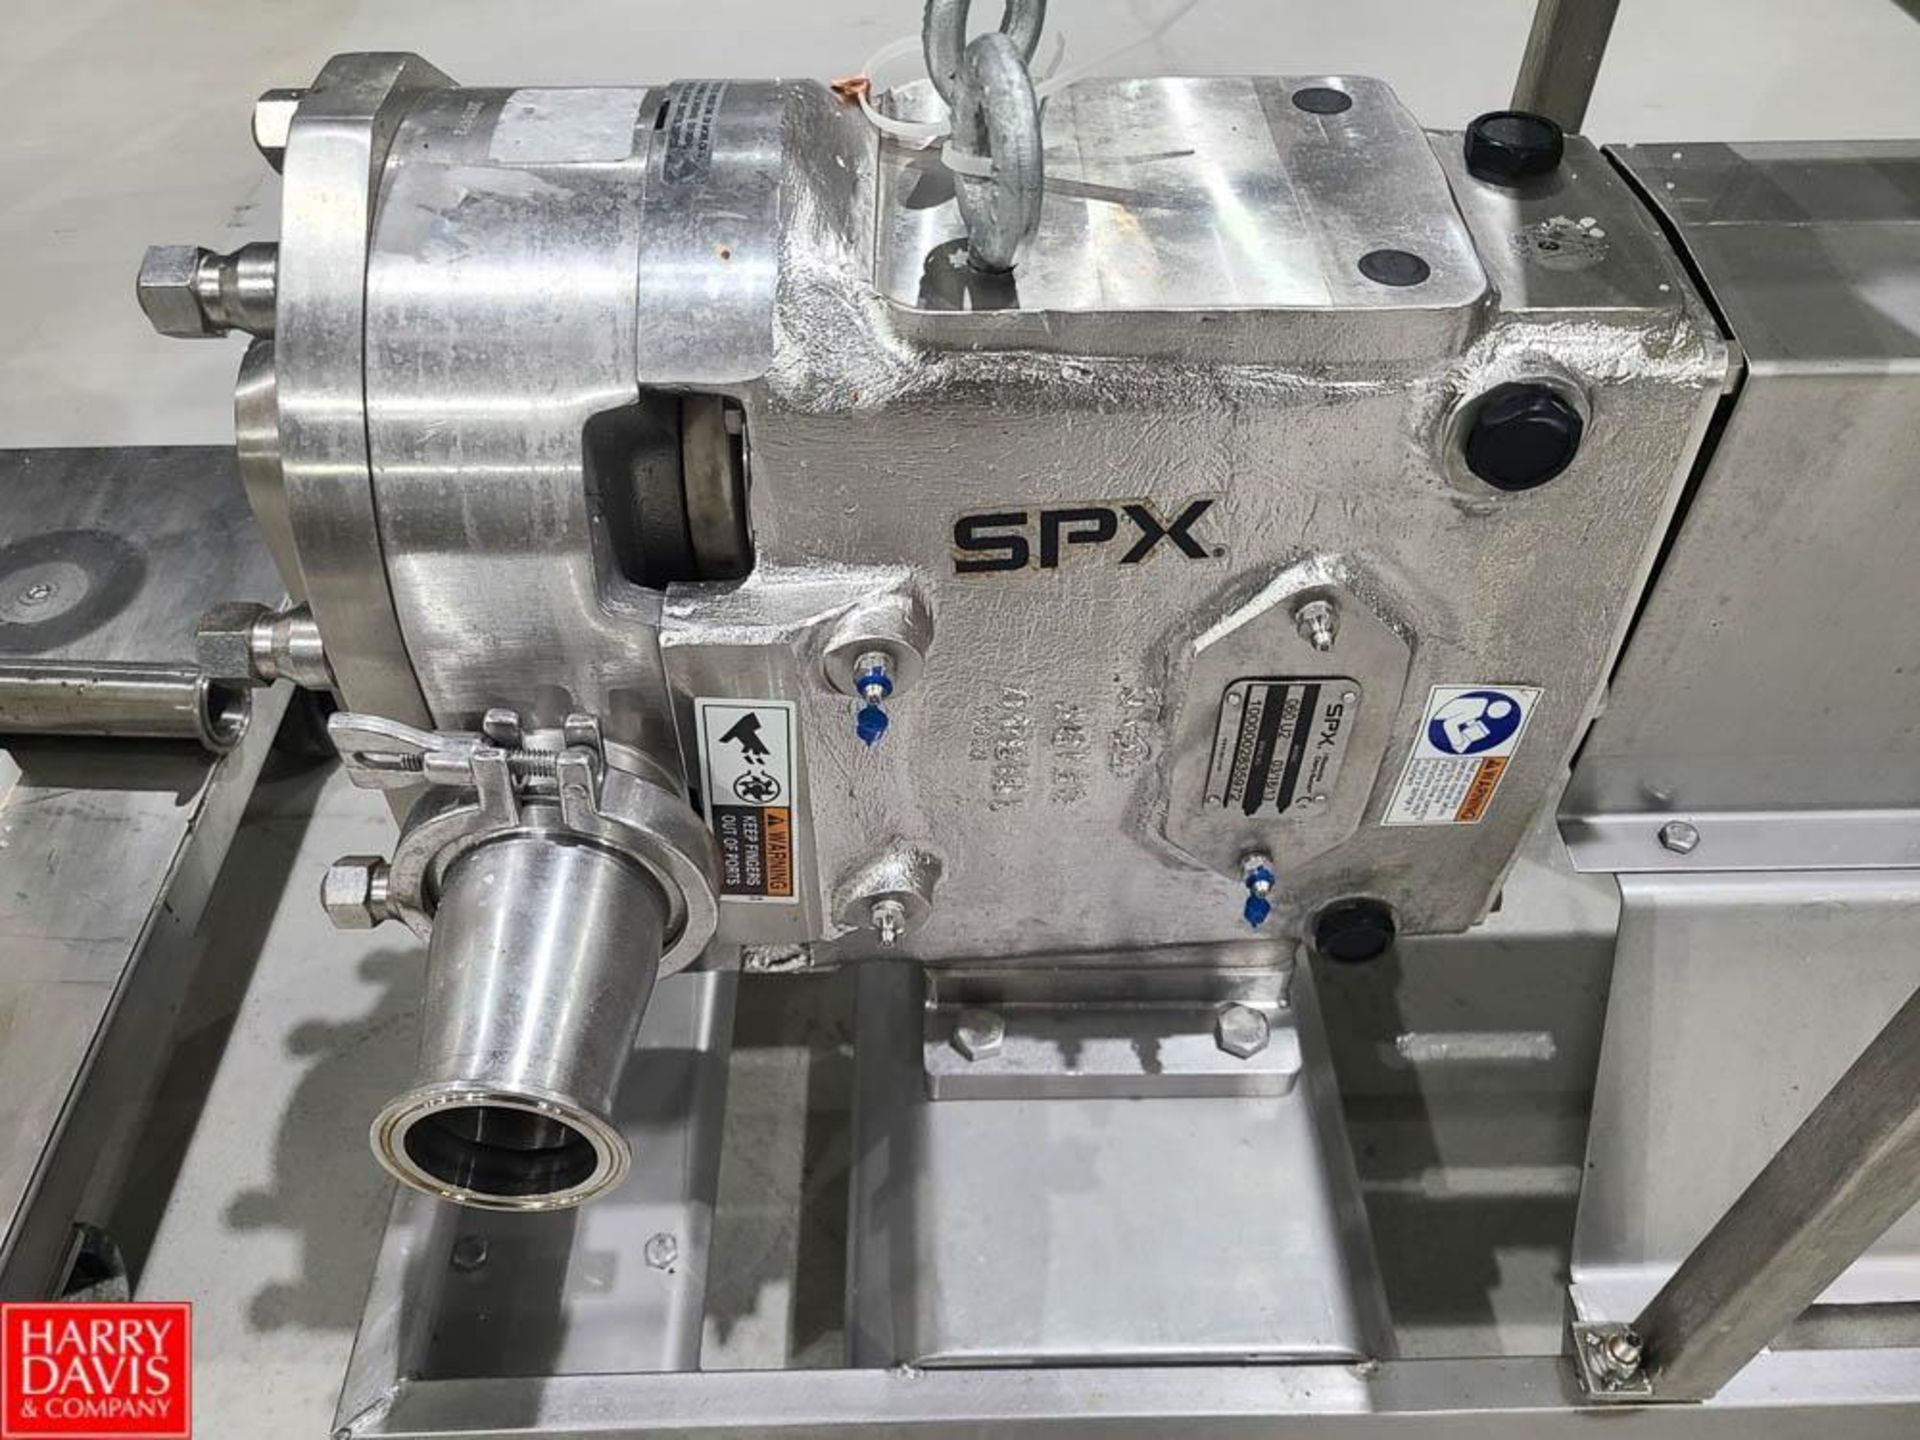 2013 SPX Portable Positive Displacement Pump, Model: 060U2 with Gear Reducing Drive and Controls - Image 2 of 6